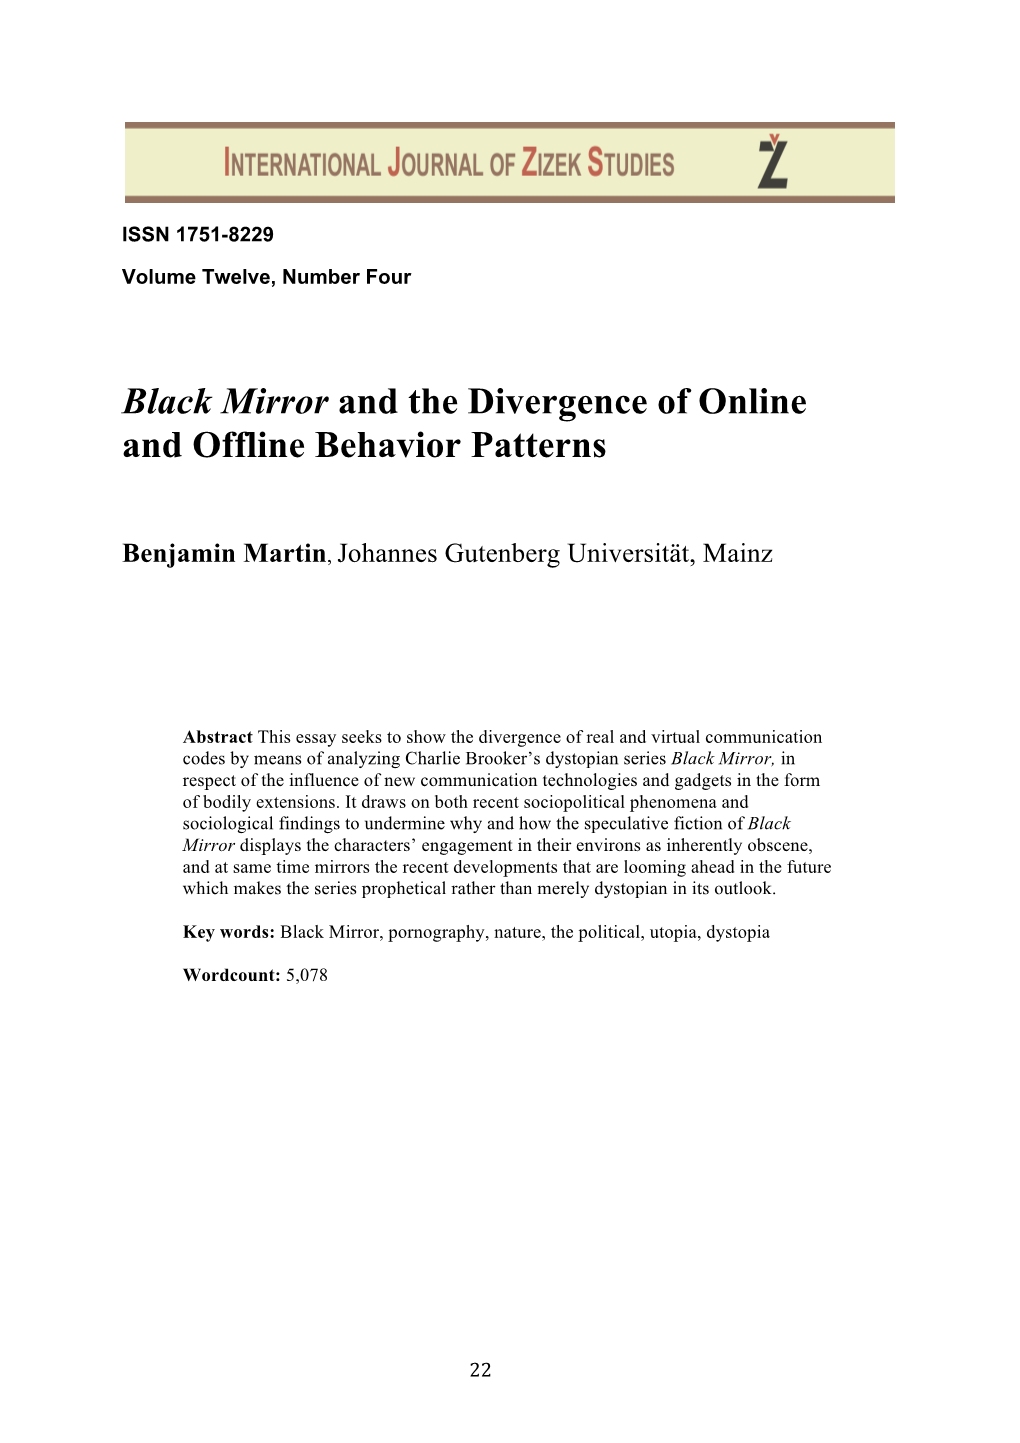 Black Mirror and the Divergence of Online and Offline Behavior Patterns